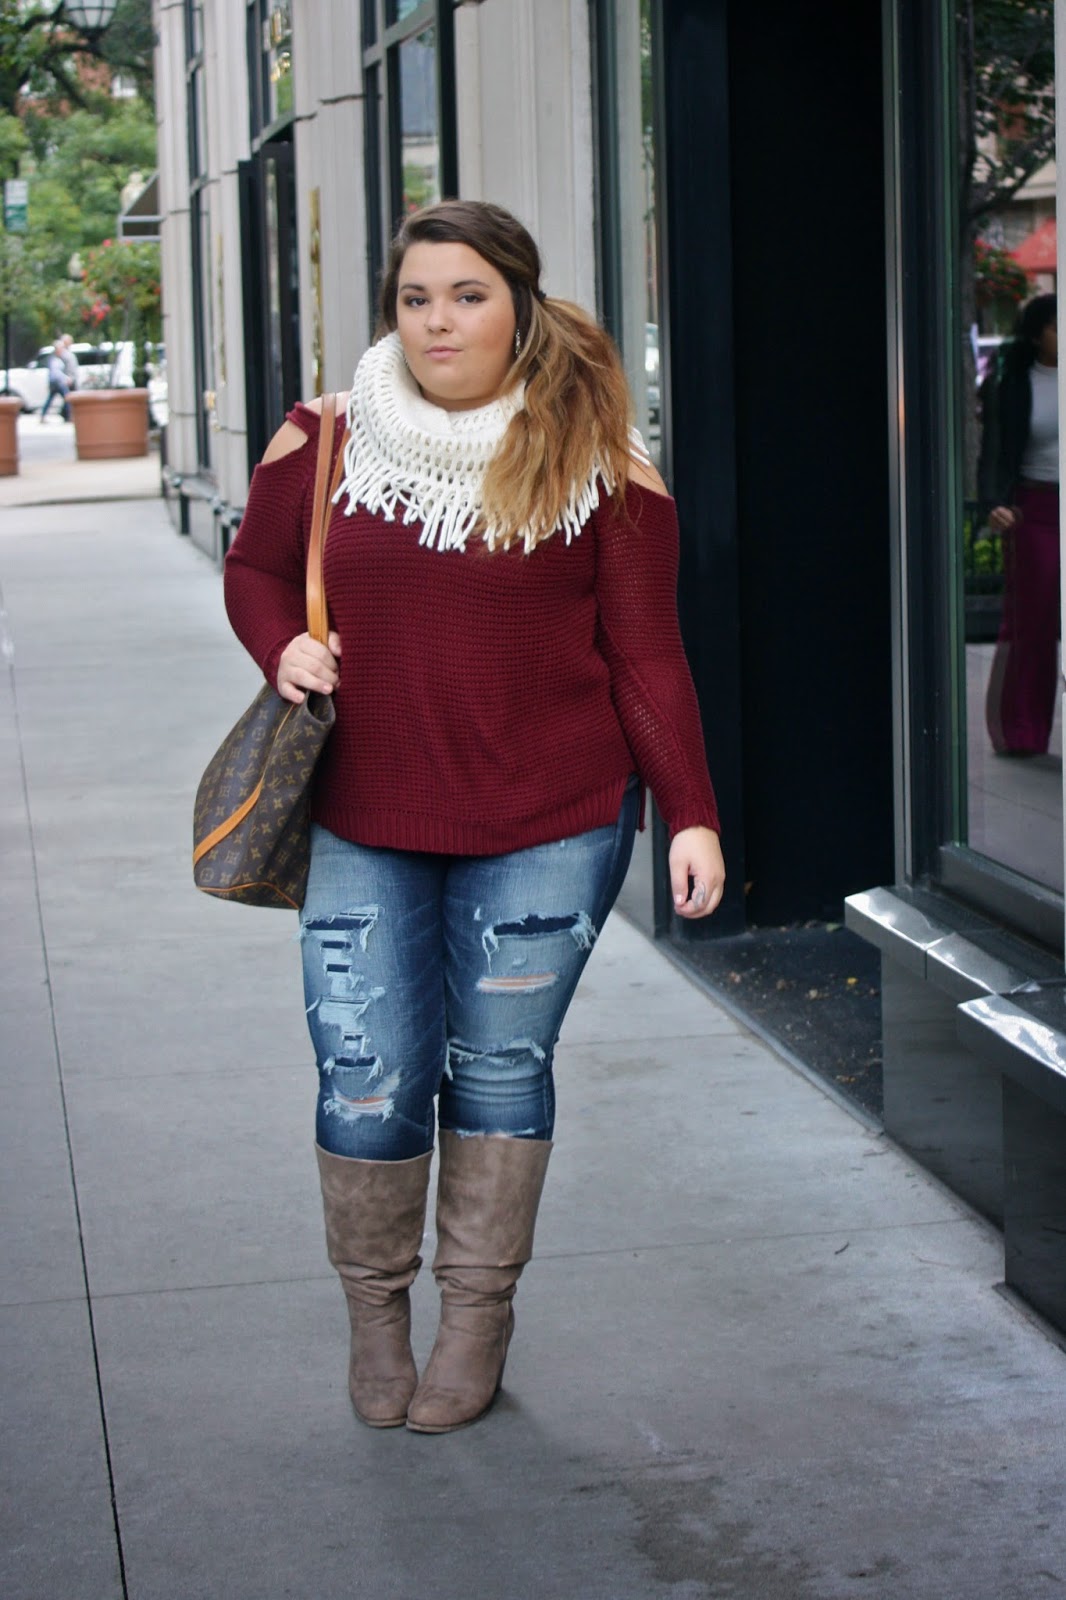 infinity scarf, fall colors, fall style, fall fashion, american eagle denim, forever 21, plus size fashion blogger, natalie craig, chicago, fashion blogger, natalie in the city, destroyed denim, boots, curvy fahionista, akira chicago, plus size boots, louis vuitton, side pony tail, thick hair styles, sweater cut-outs,